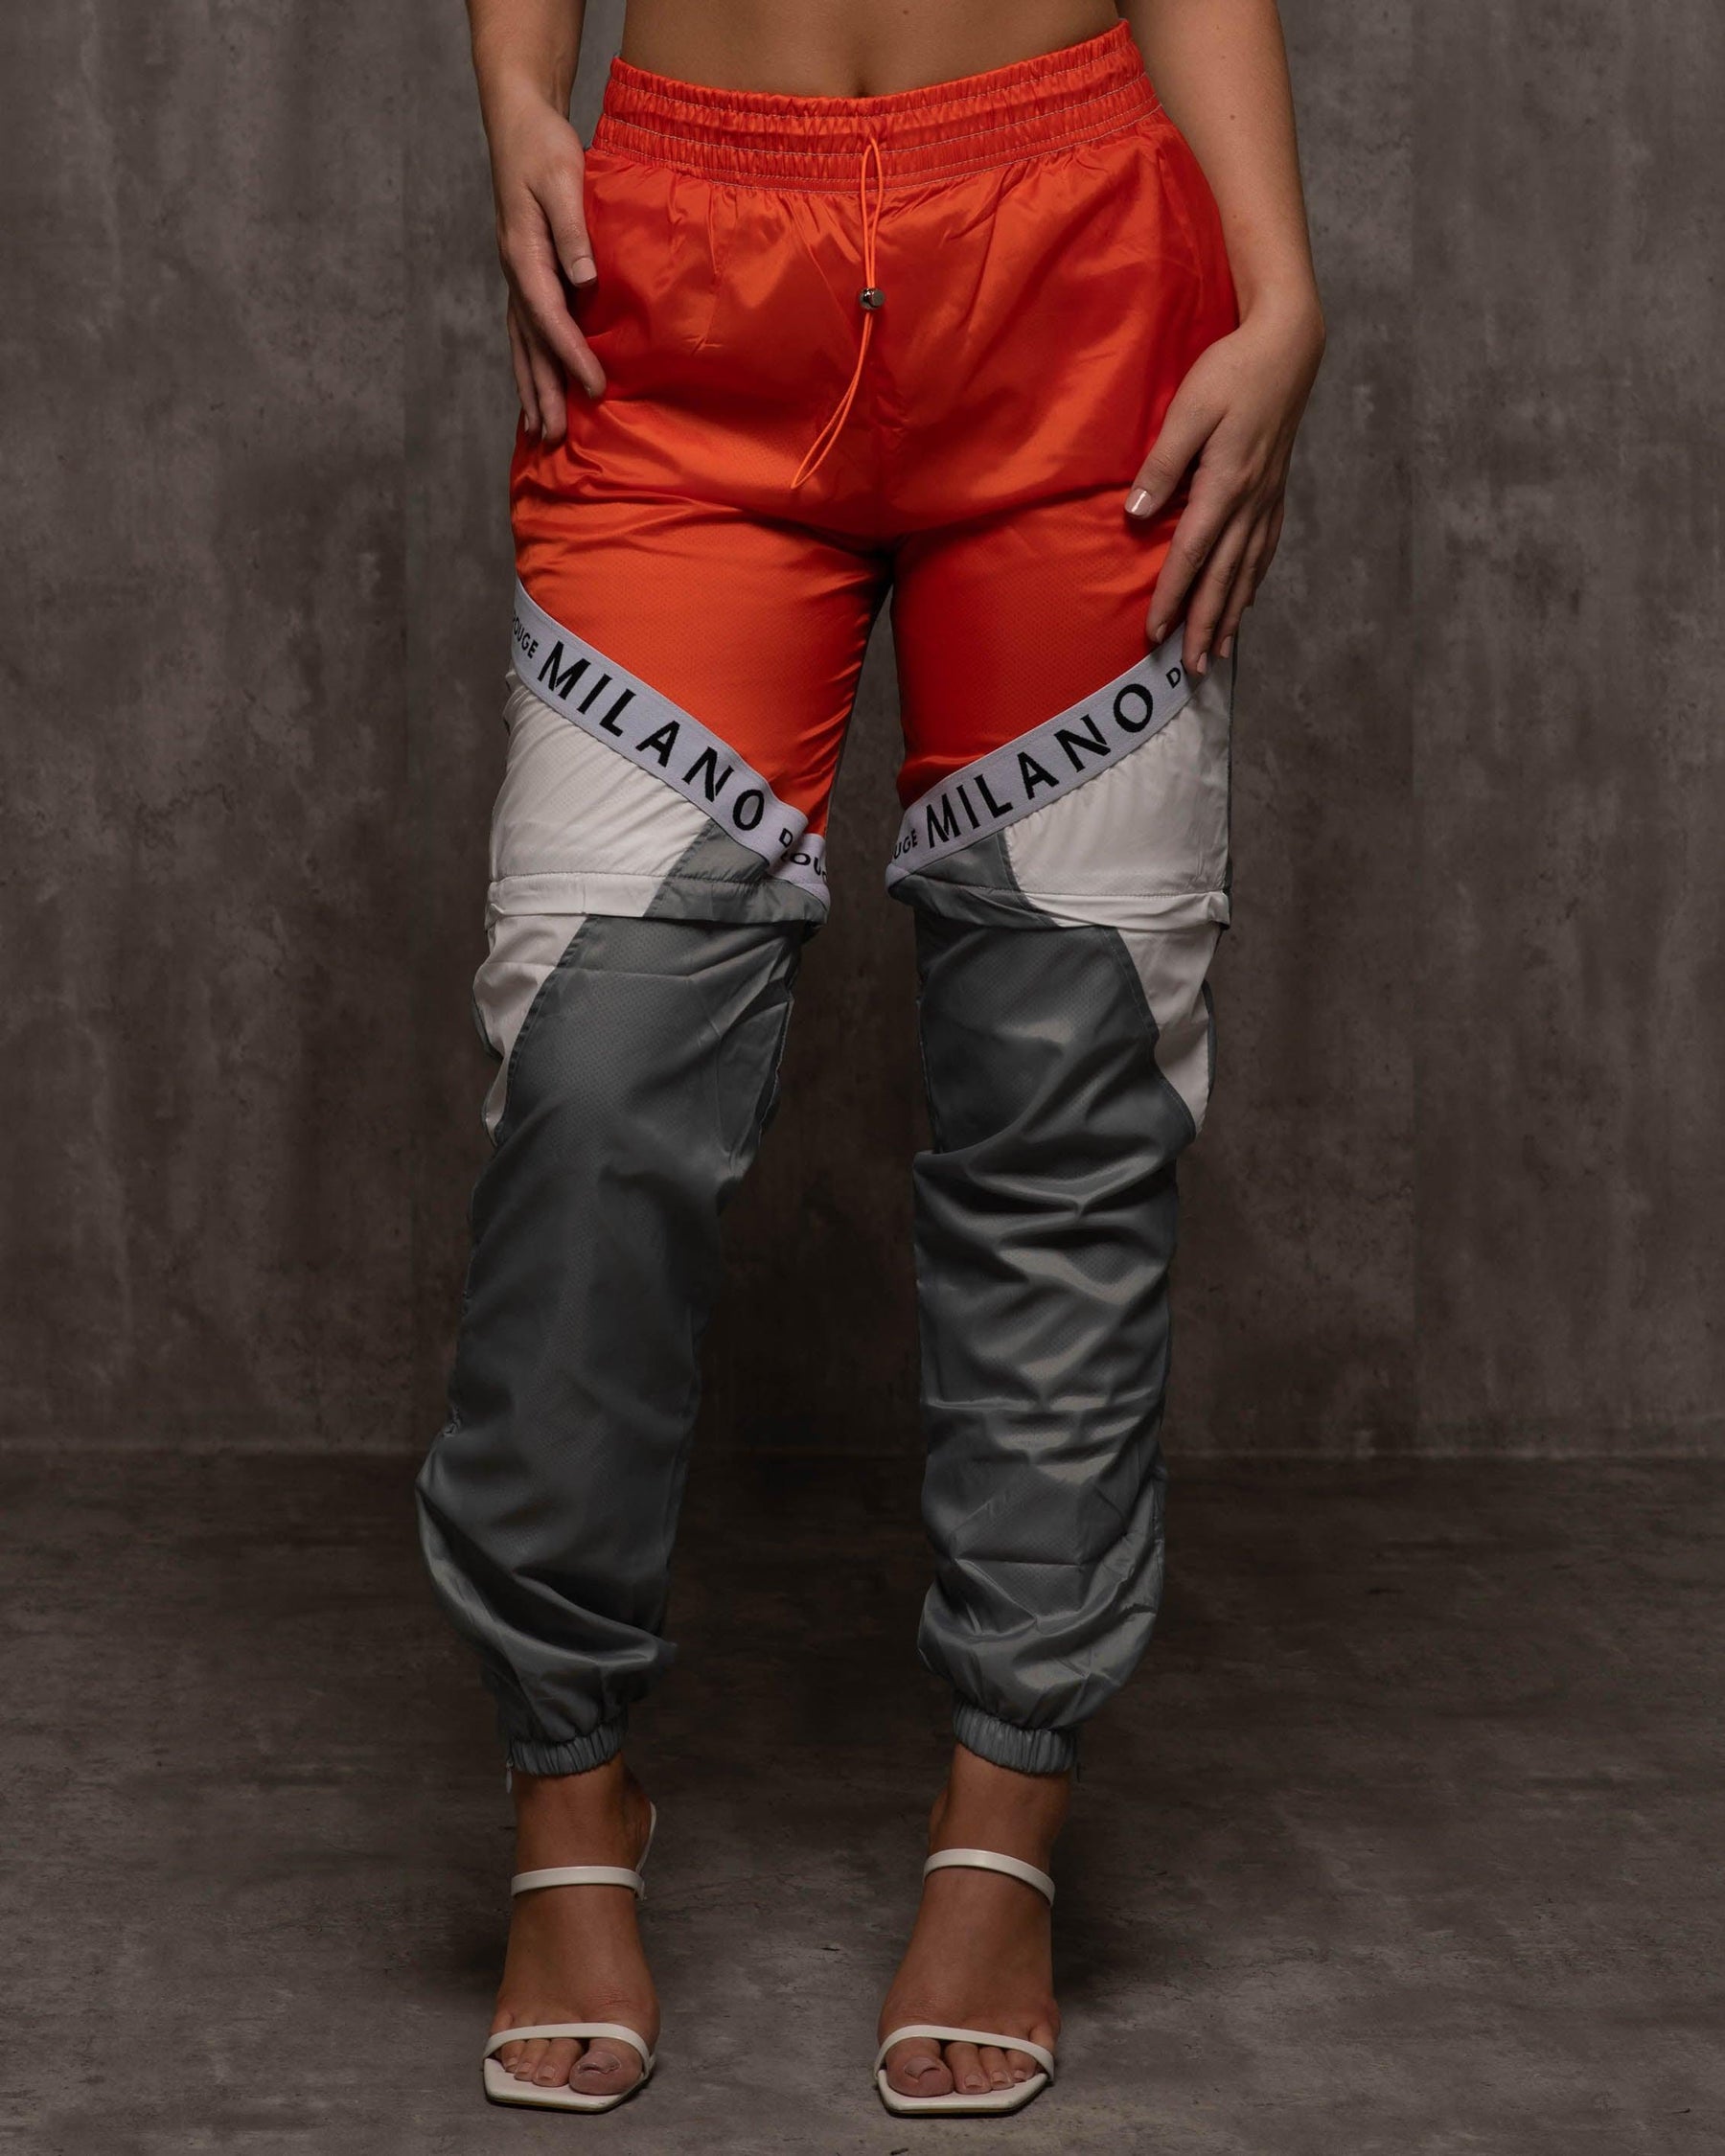 Eagle Fashion Cotton Ladies Stylish Track Suit, Size: 30-34 at Rs